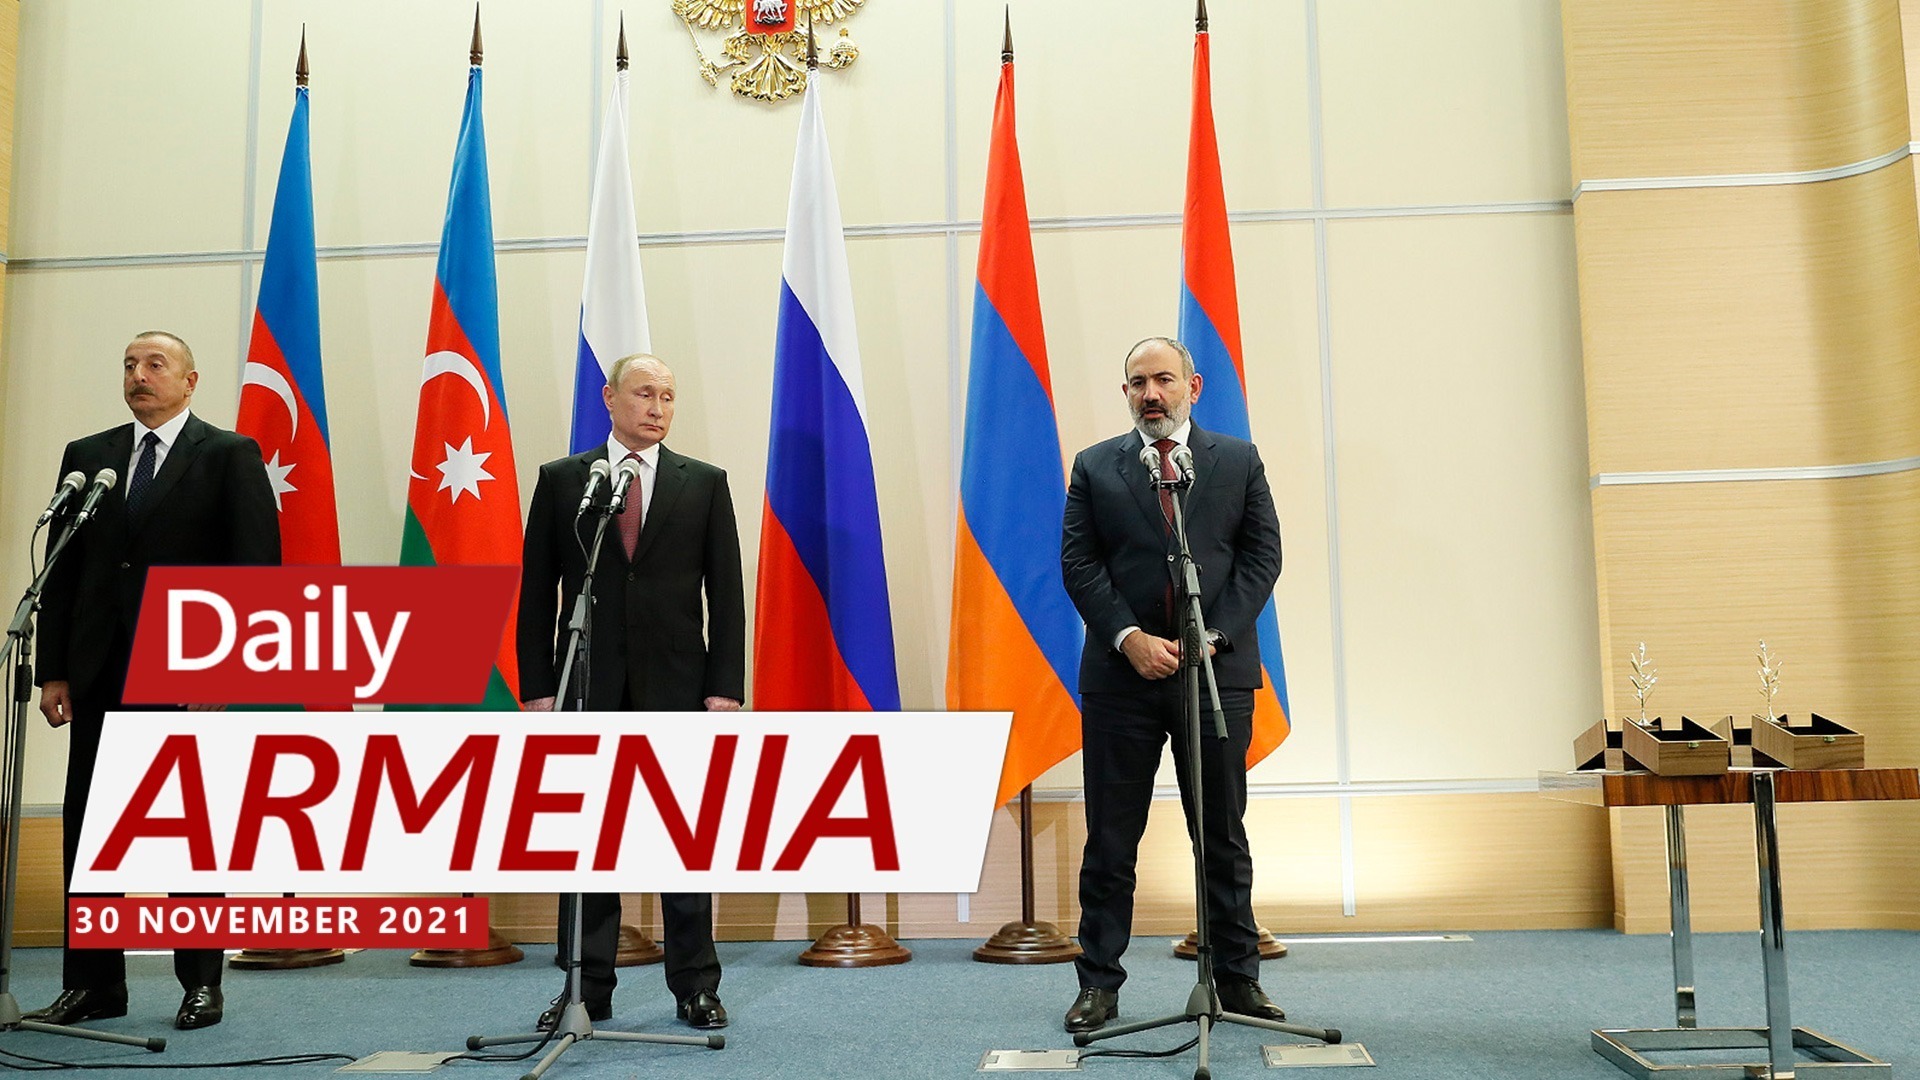 “Logic of corridors” rejected again in Sochi statement, says Armenian official